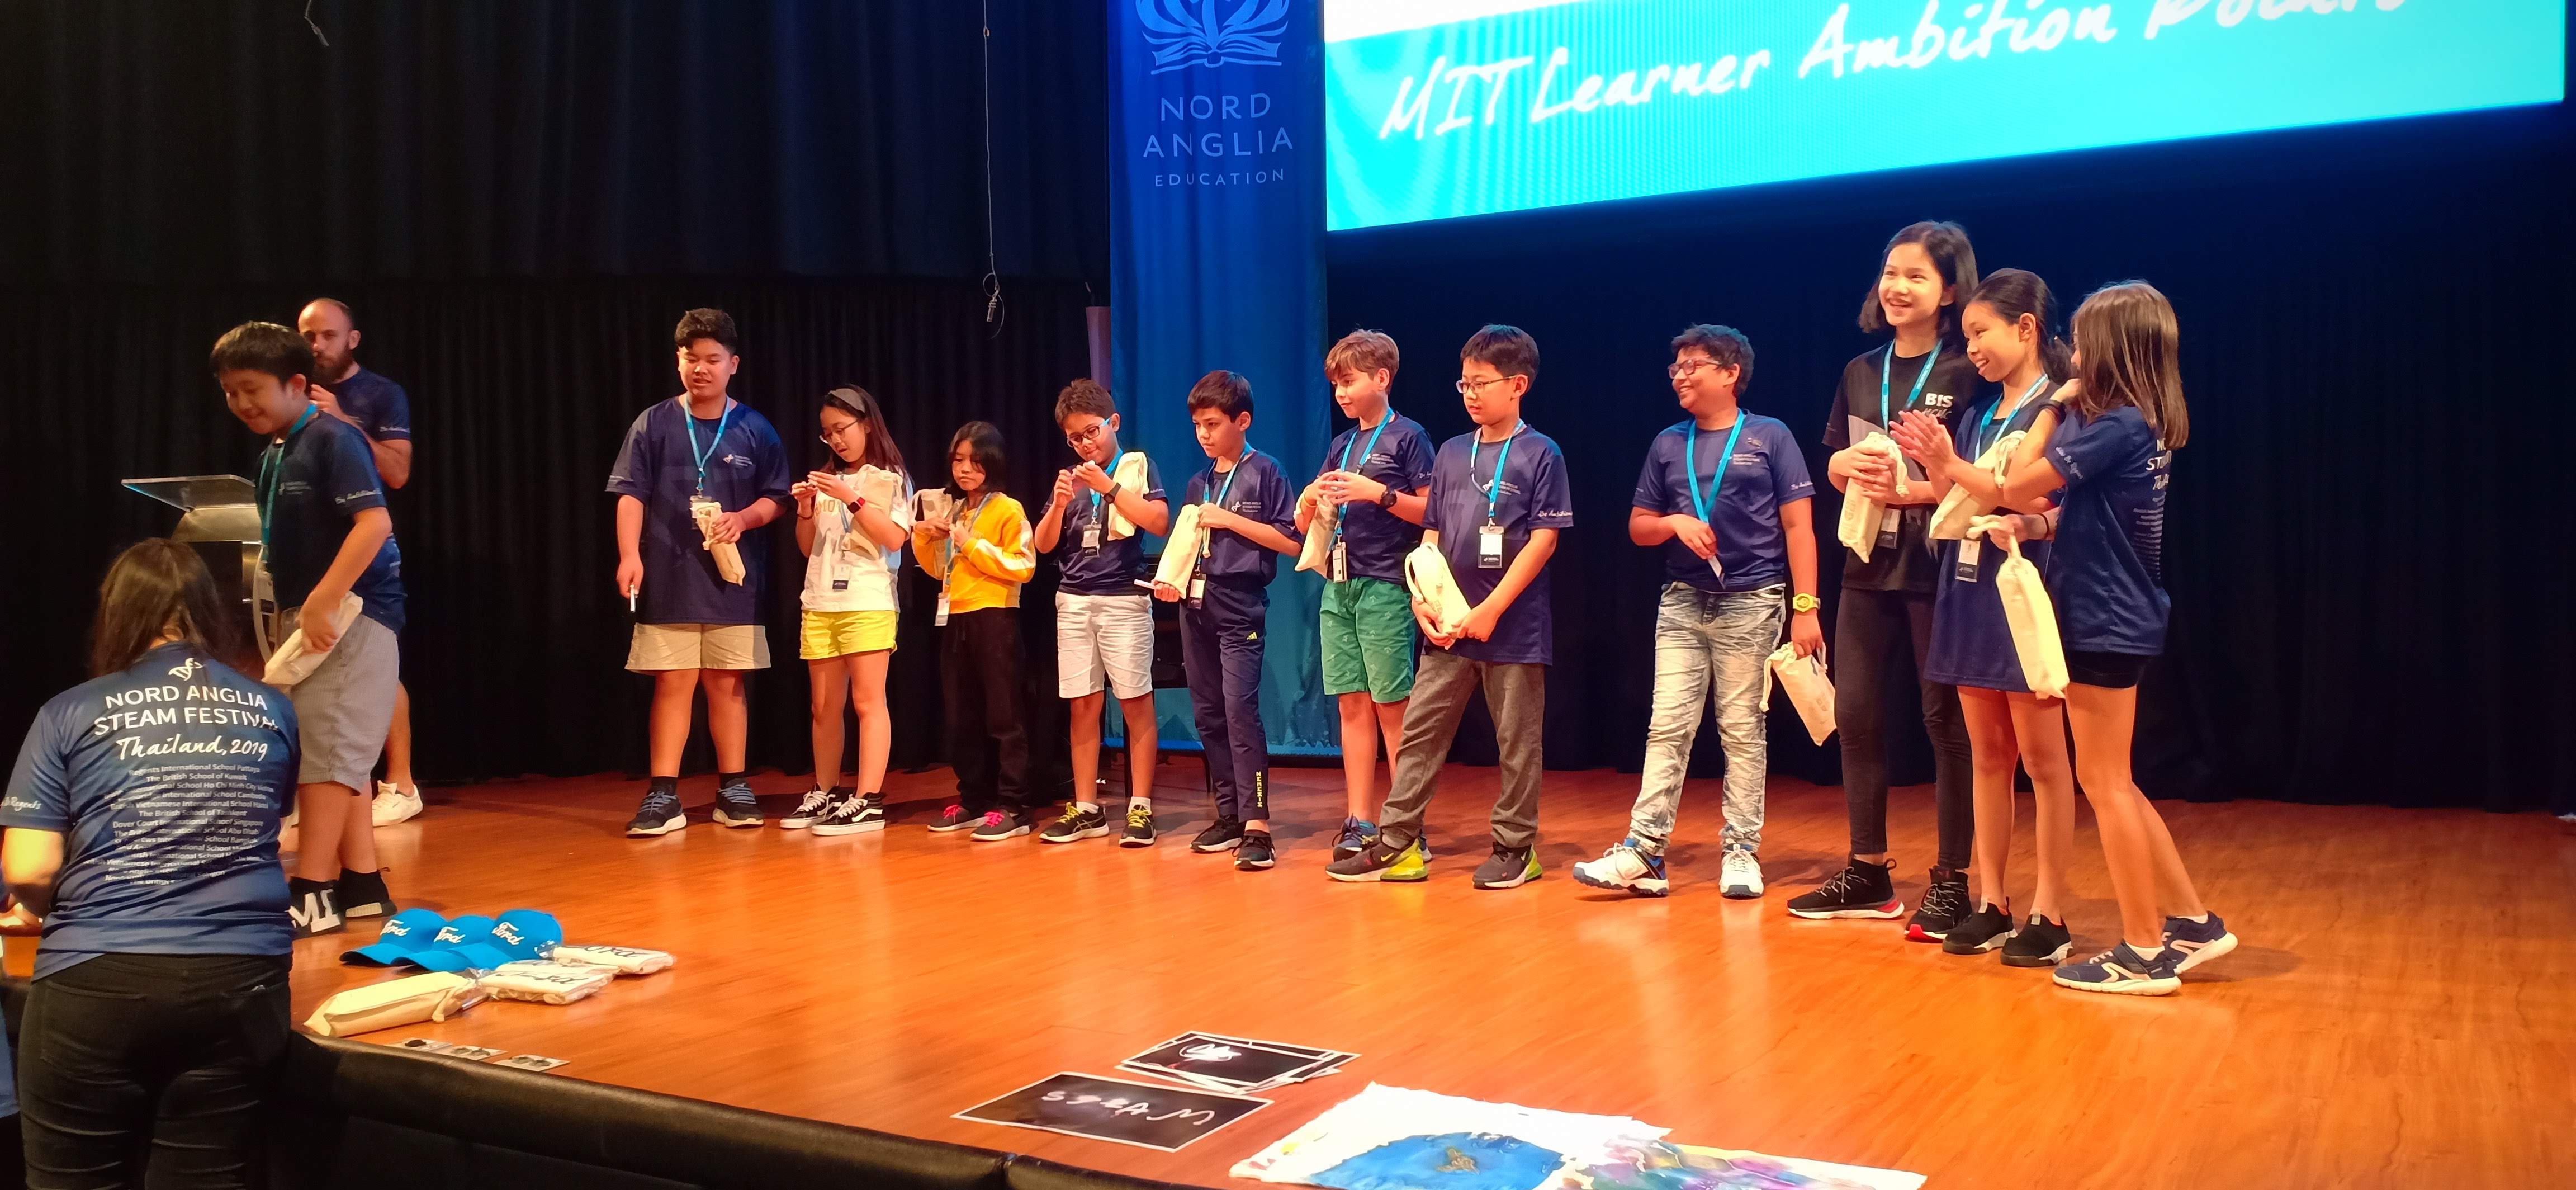 NAE STEAM Festival provides Northbridge students with an opportunity to showcase their skills-nae-steam-festival-provides-northbridge-students-with-an-opportunity-to-showcase-their-skills-IMG20191105151442